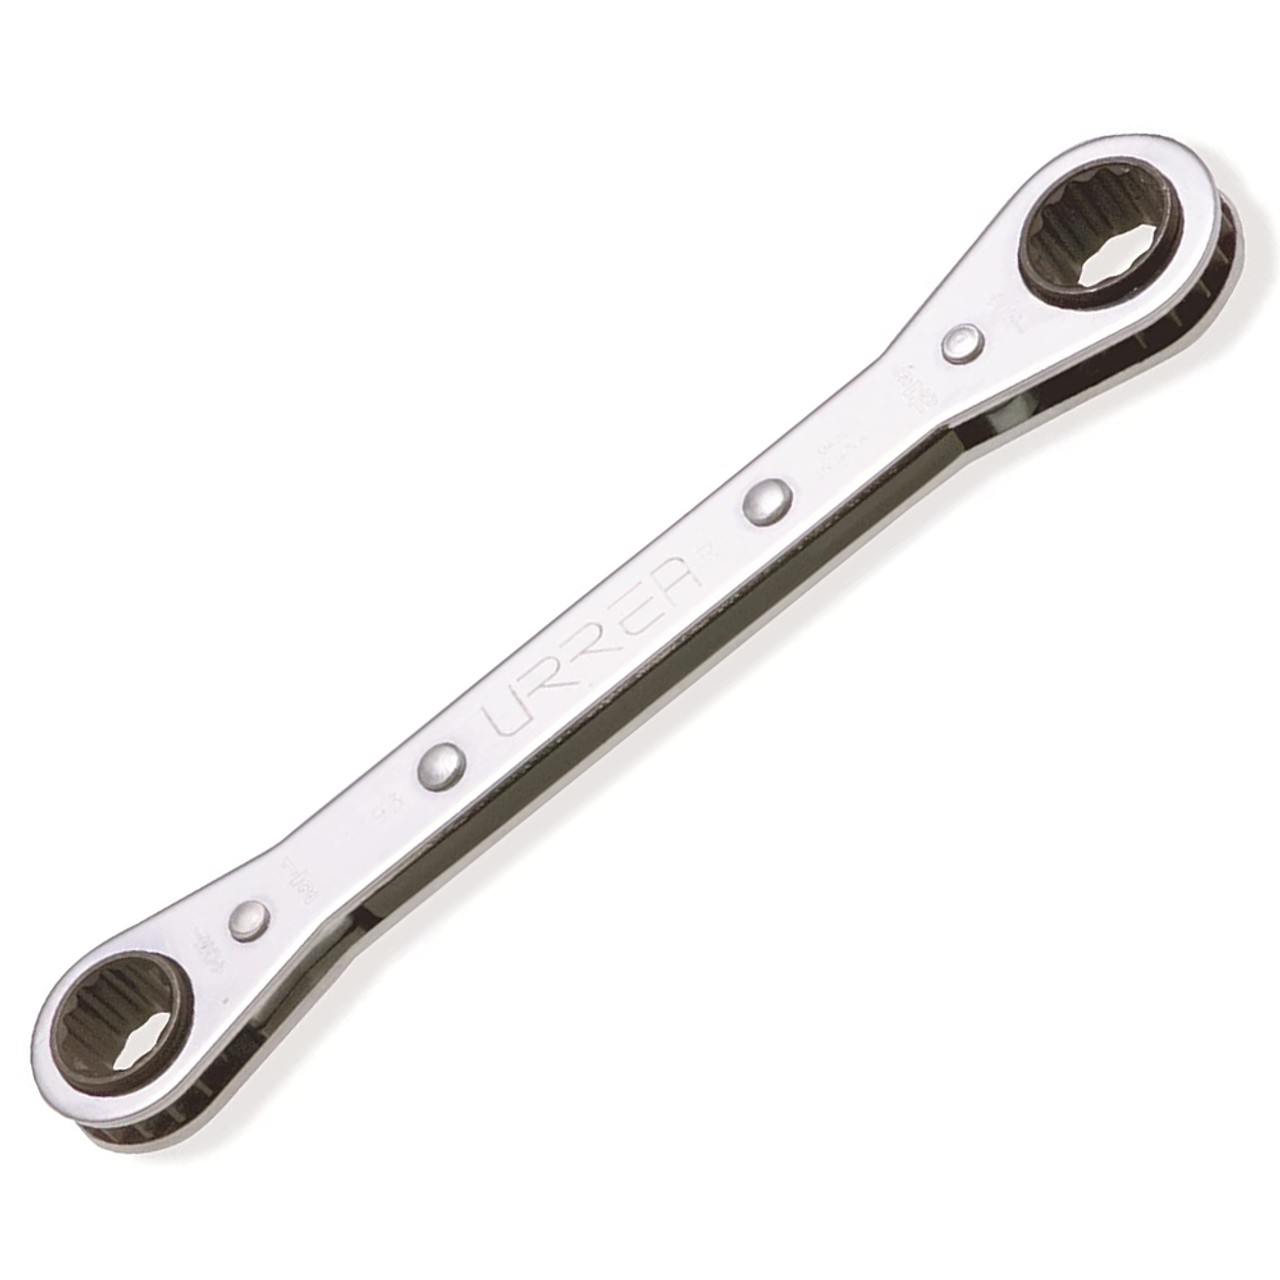 Metric Flat Ratcheting Box-End wrench, Size: 10 x 13 mm,12 Point ,Total Length: 6-7/8"